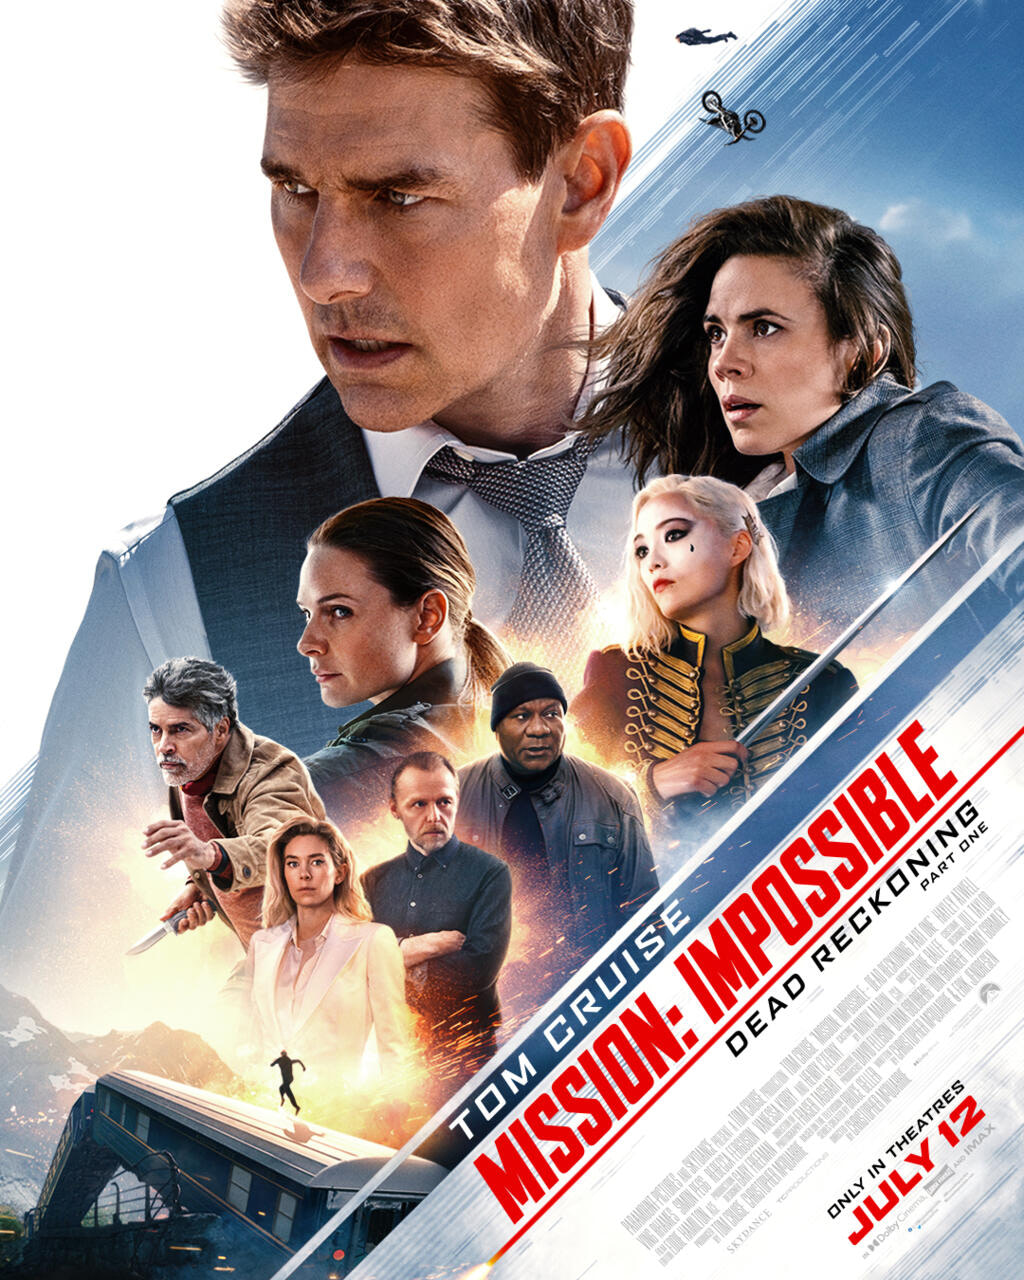 Mission: Impossible Dead Reckoning Part 1 Trailer Has World “Coming After” Ethan